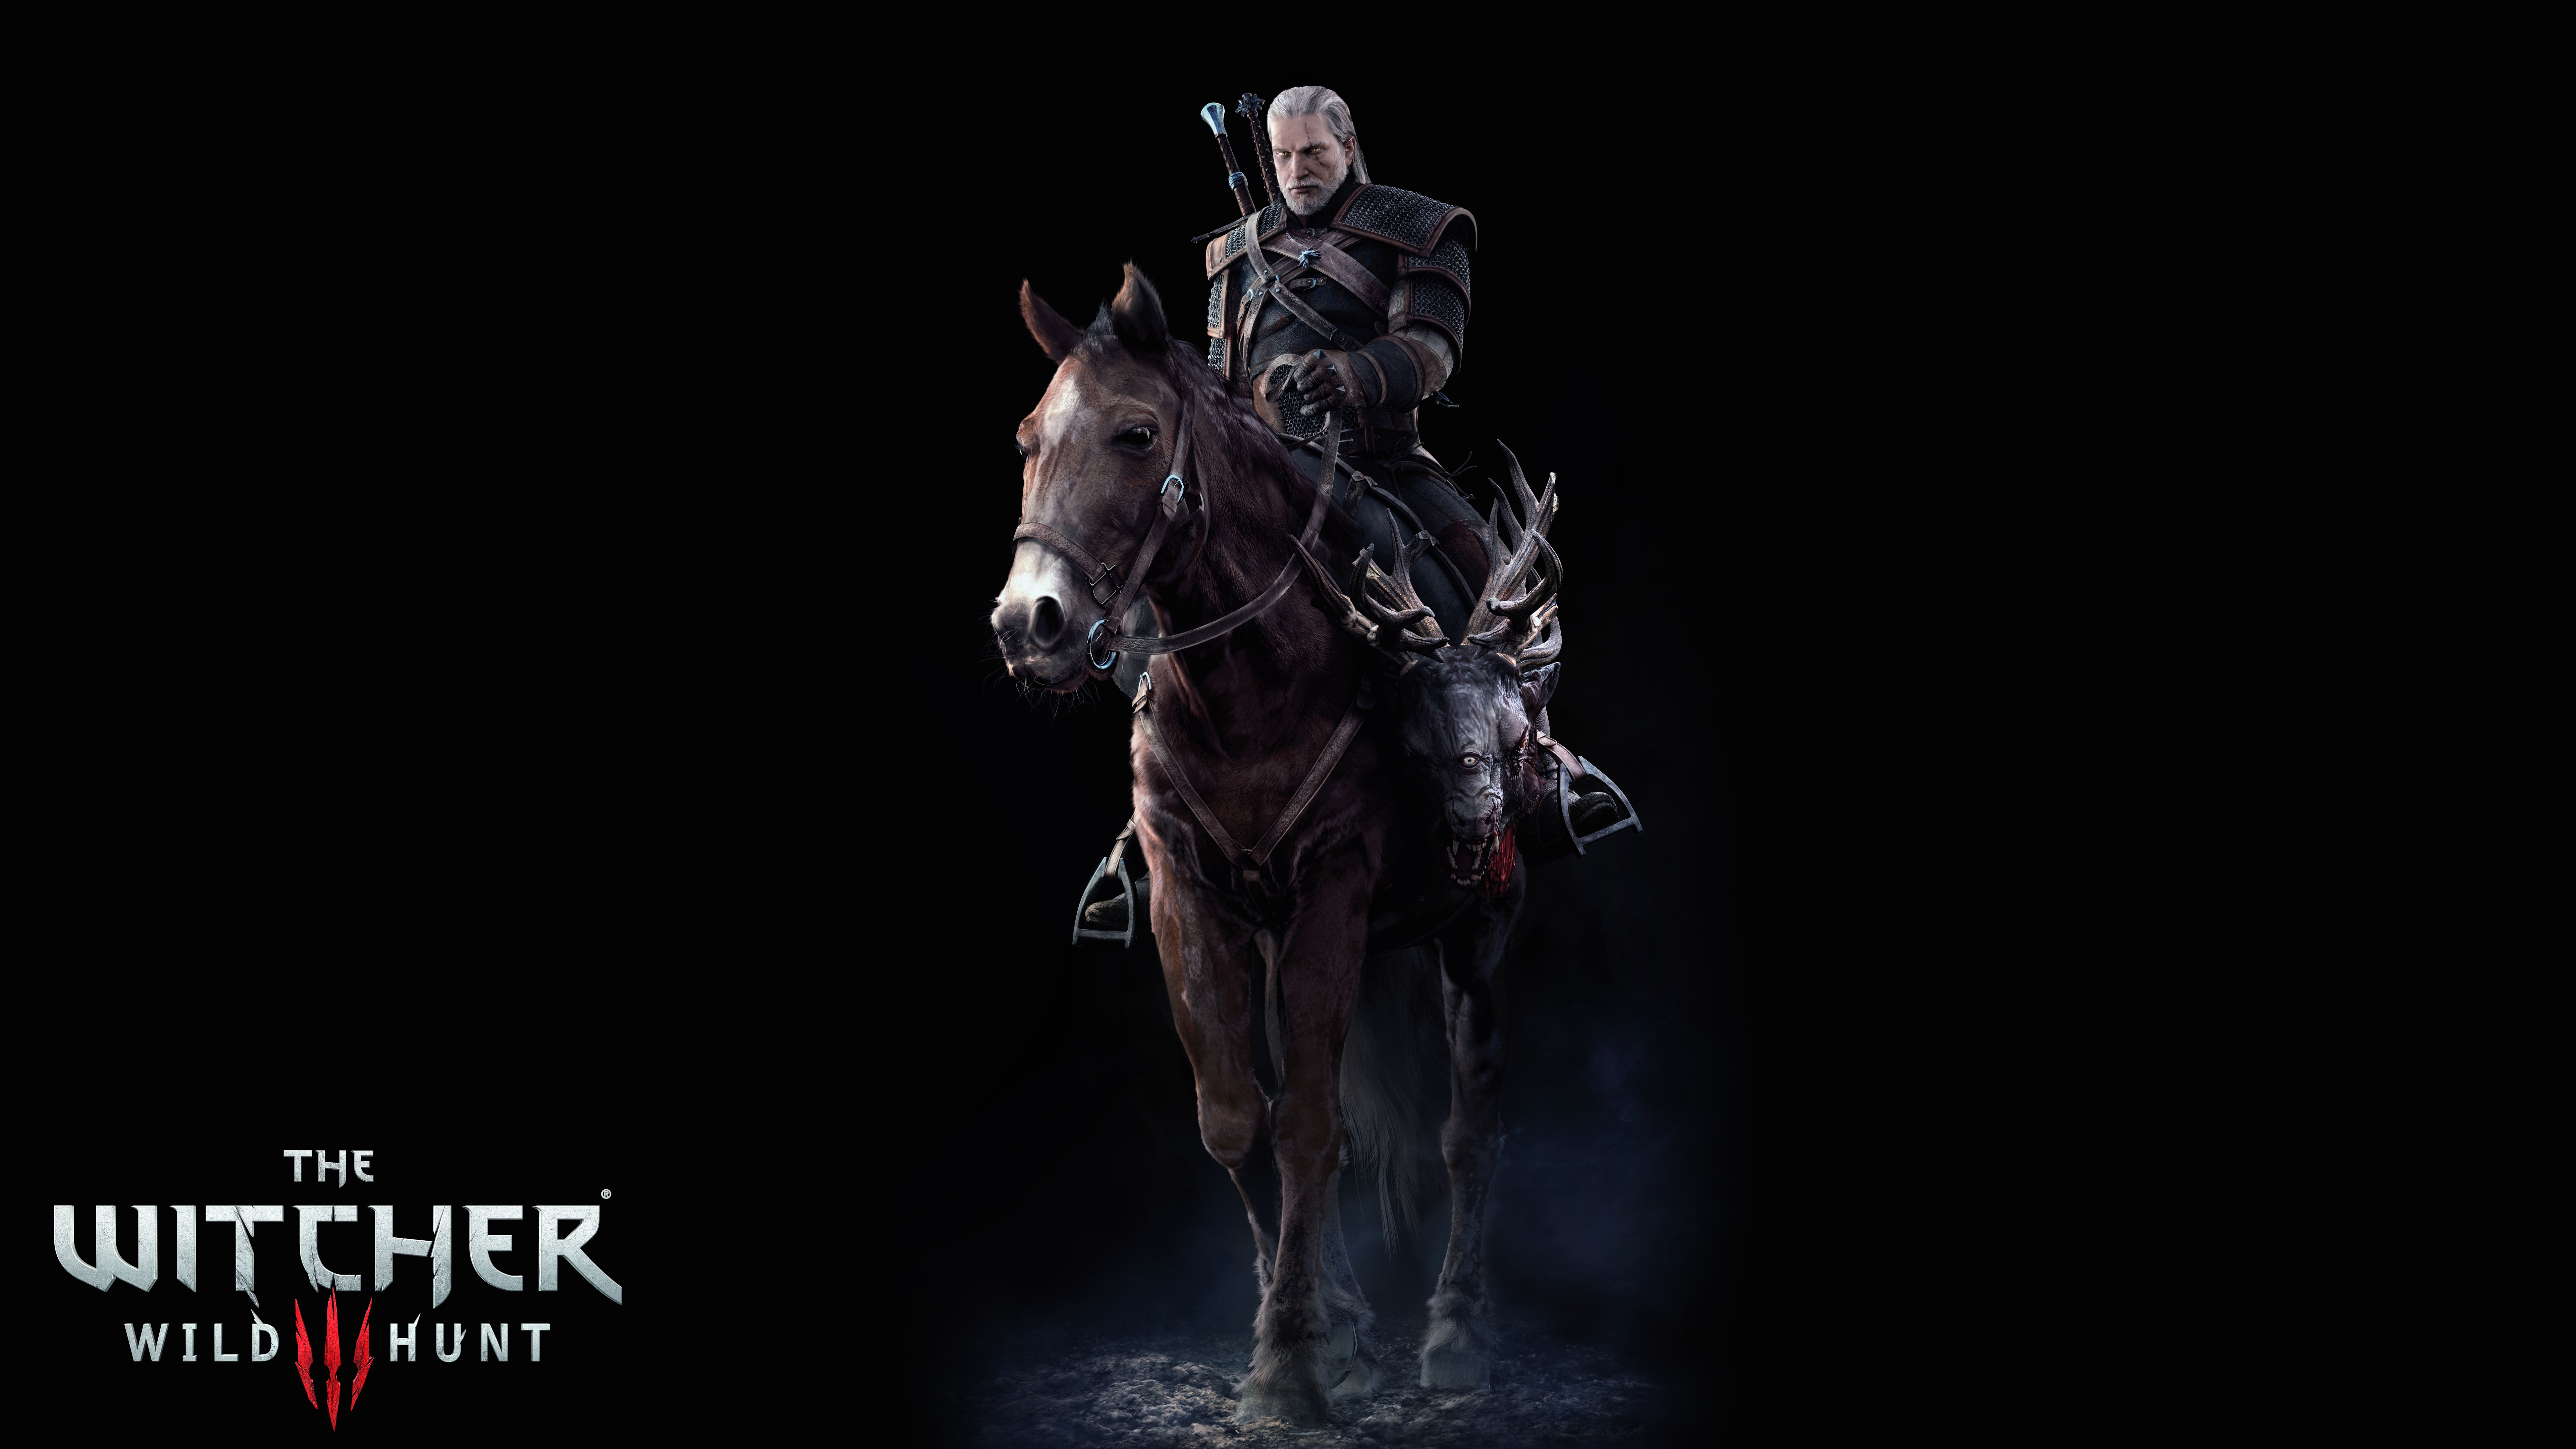 the witcher 3: wild hunt, the witcher, geralt of rivia, video game Free Stock Photo